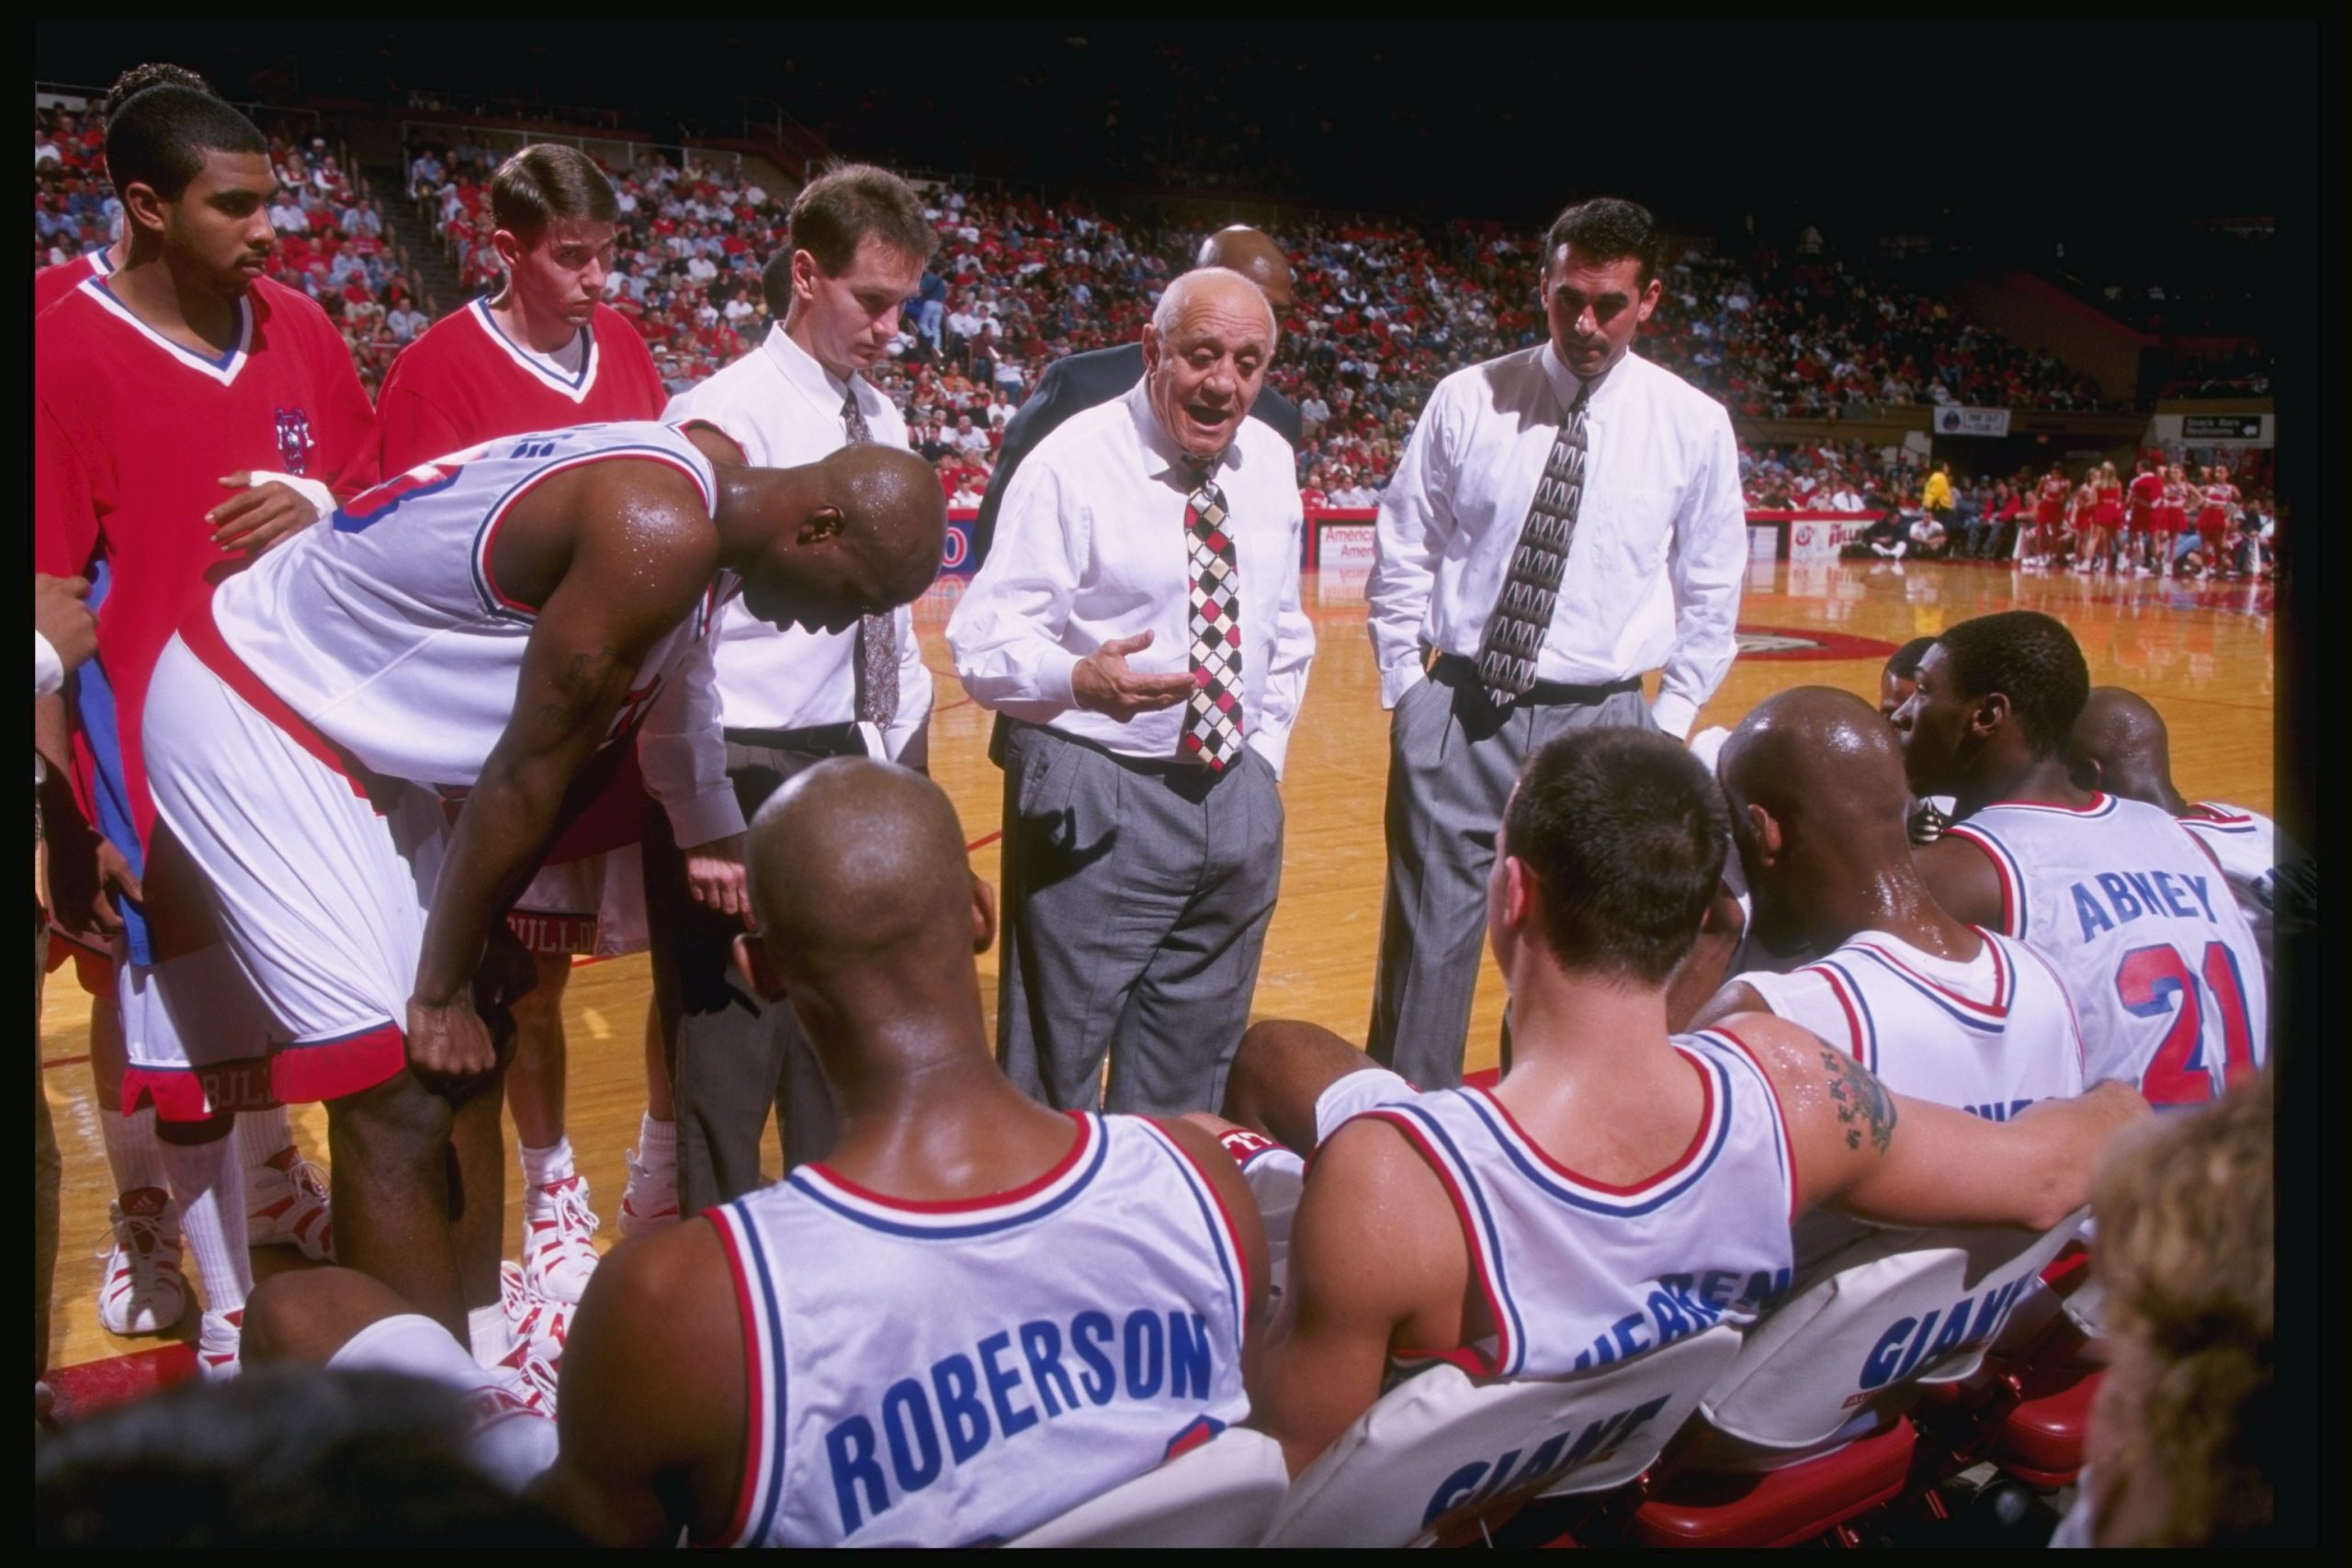 The 30 Most Influential NCAA MBB Teams of SLAM’s 30 Years: ‘98 Fresno State